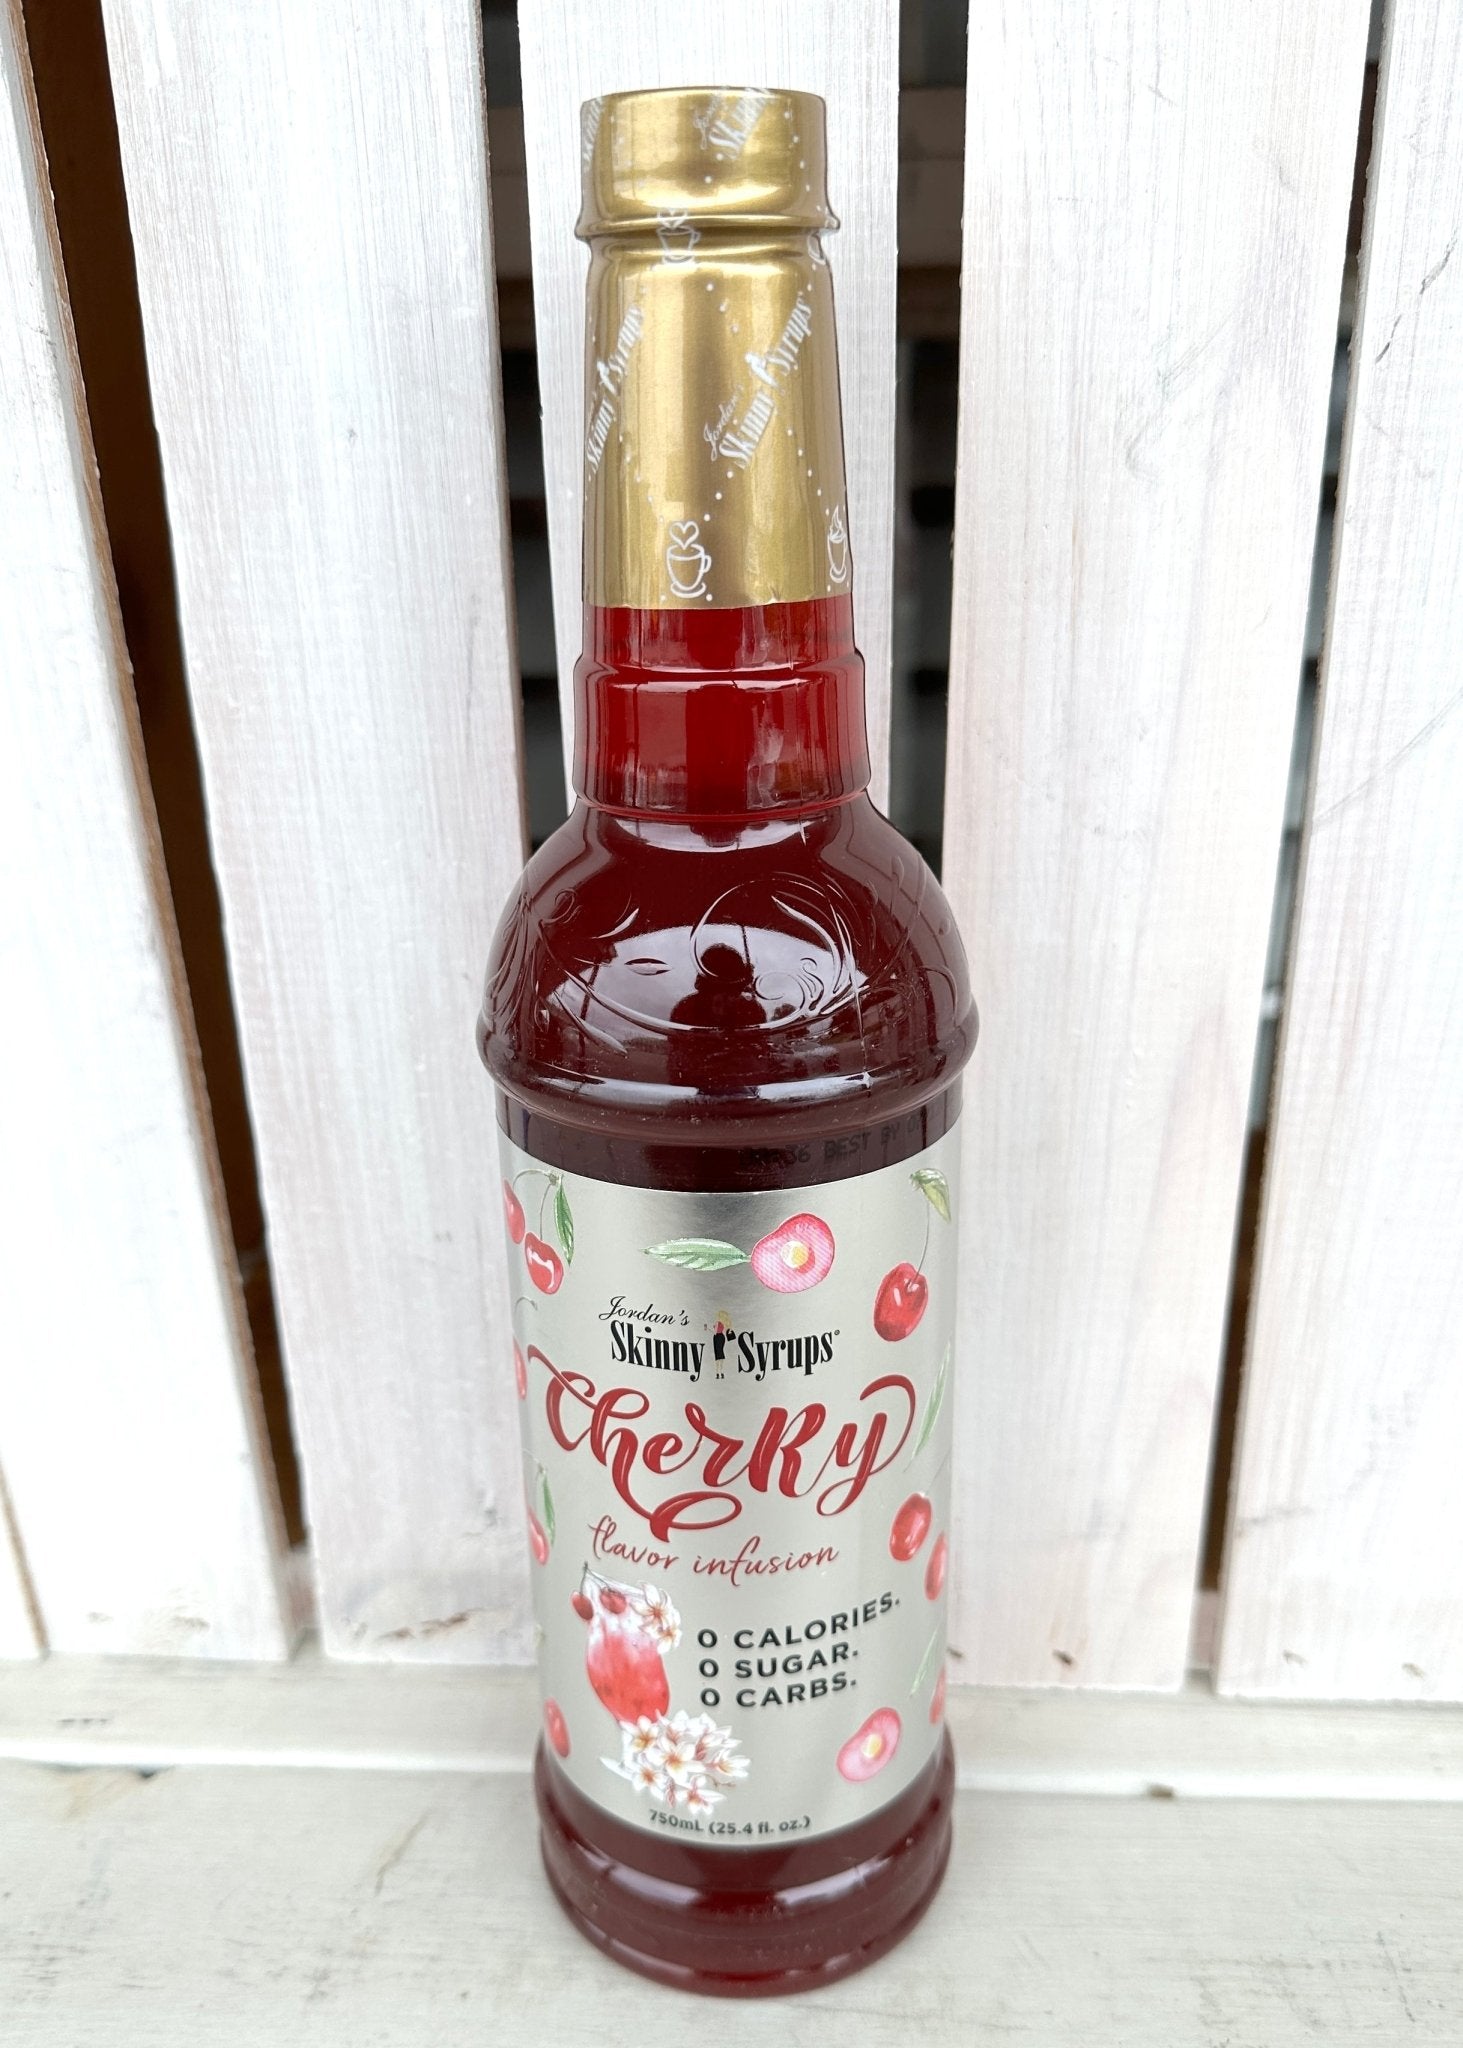 Jordan's Sugar Free Cherry Flavor Infusion - Skinny Syrups - 25.4/750ml - Skinny Syrups -Jimberly's Boutique-Olive Branch-Mississippi